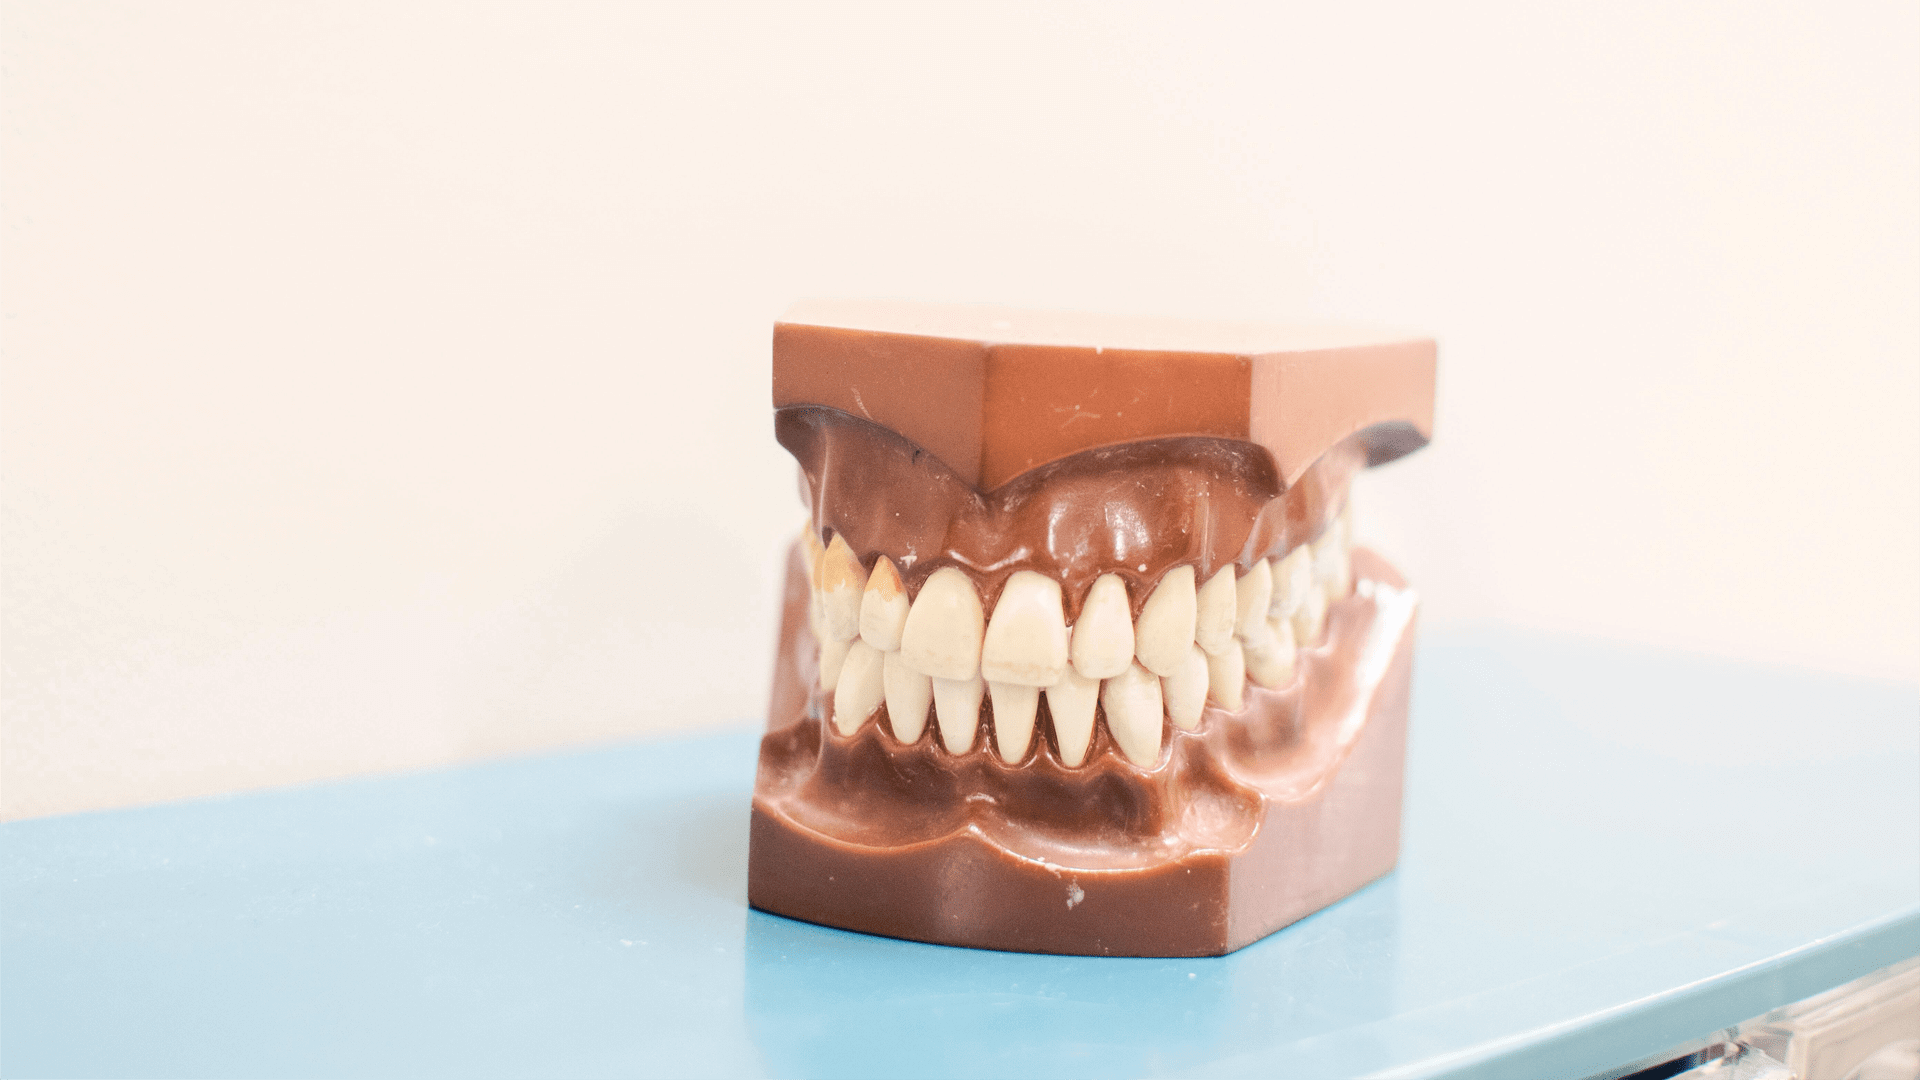 A mold of the human mouth with teeth